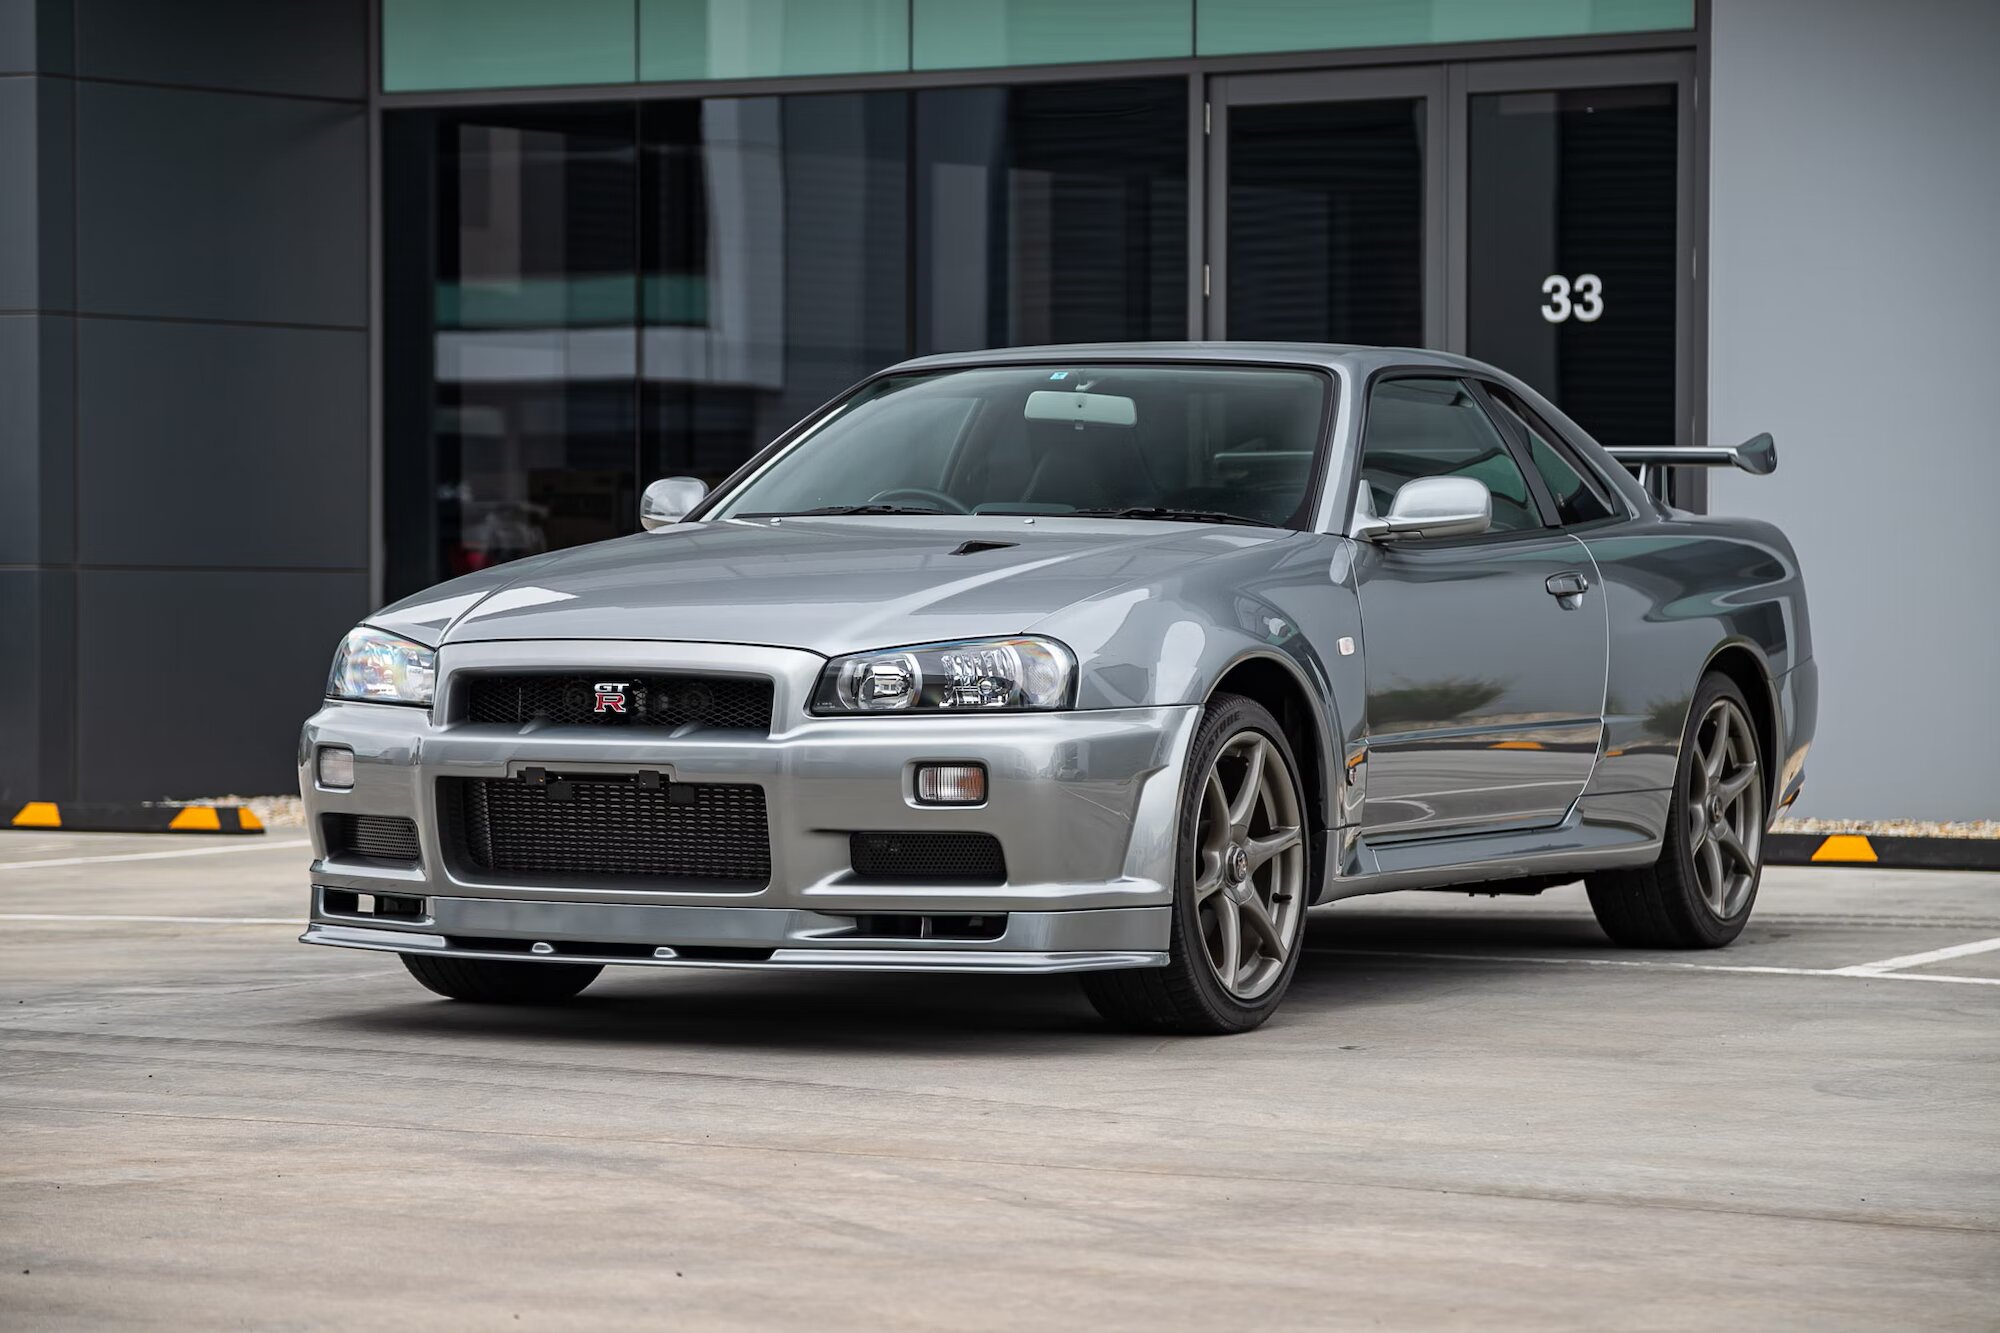 https://s1.cdn.autoevolution.com/images/news/another-ultra-rare-2001-nissan-skyline-r34-gt-r-v-spec-ii-with-2000-miles-up-for-grabs-198502_1.jpg